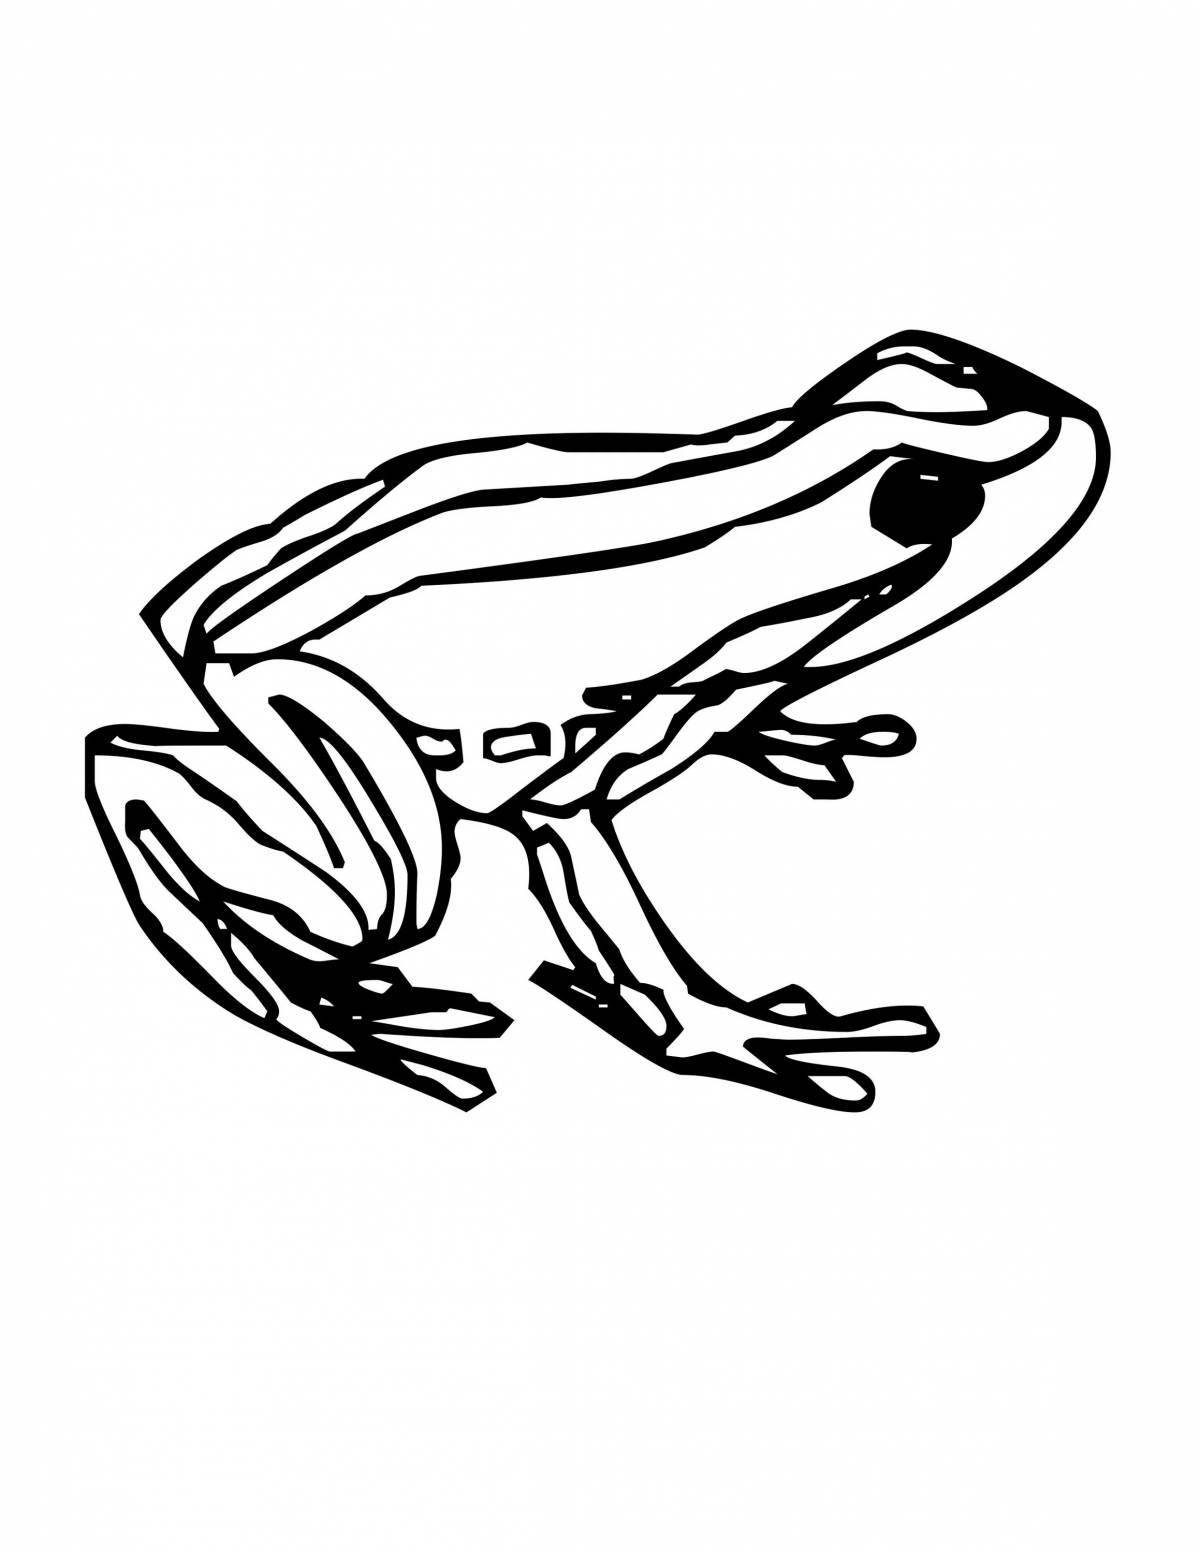 Coloring book bright frog